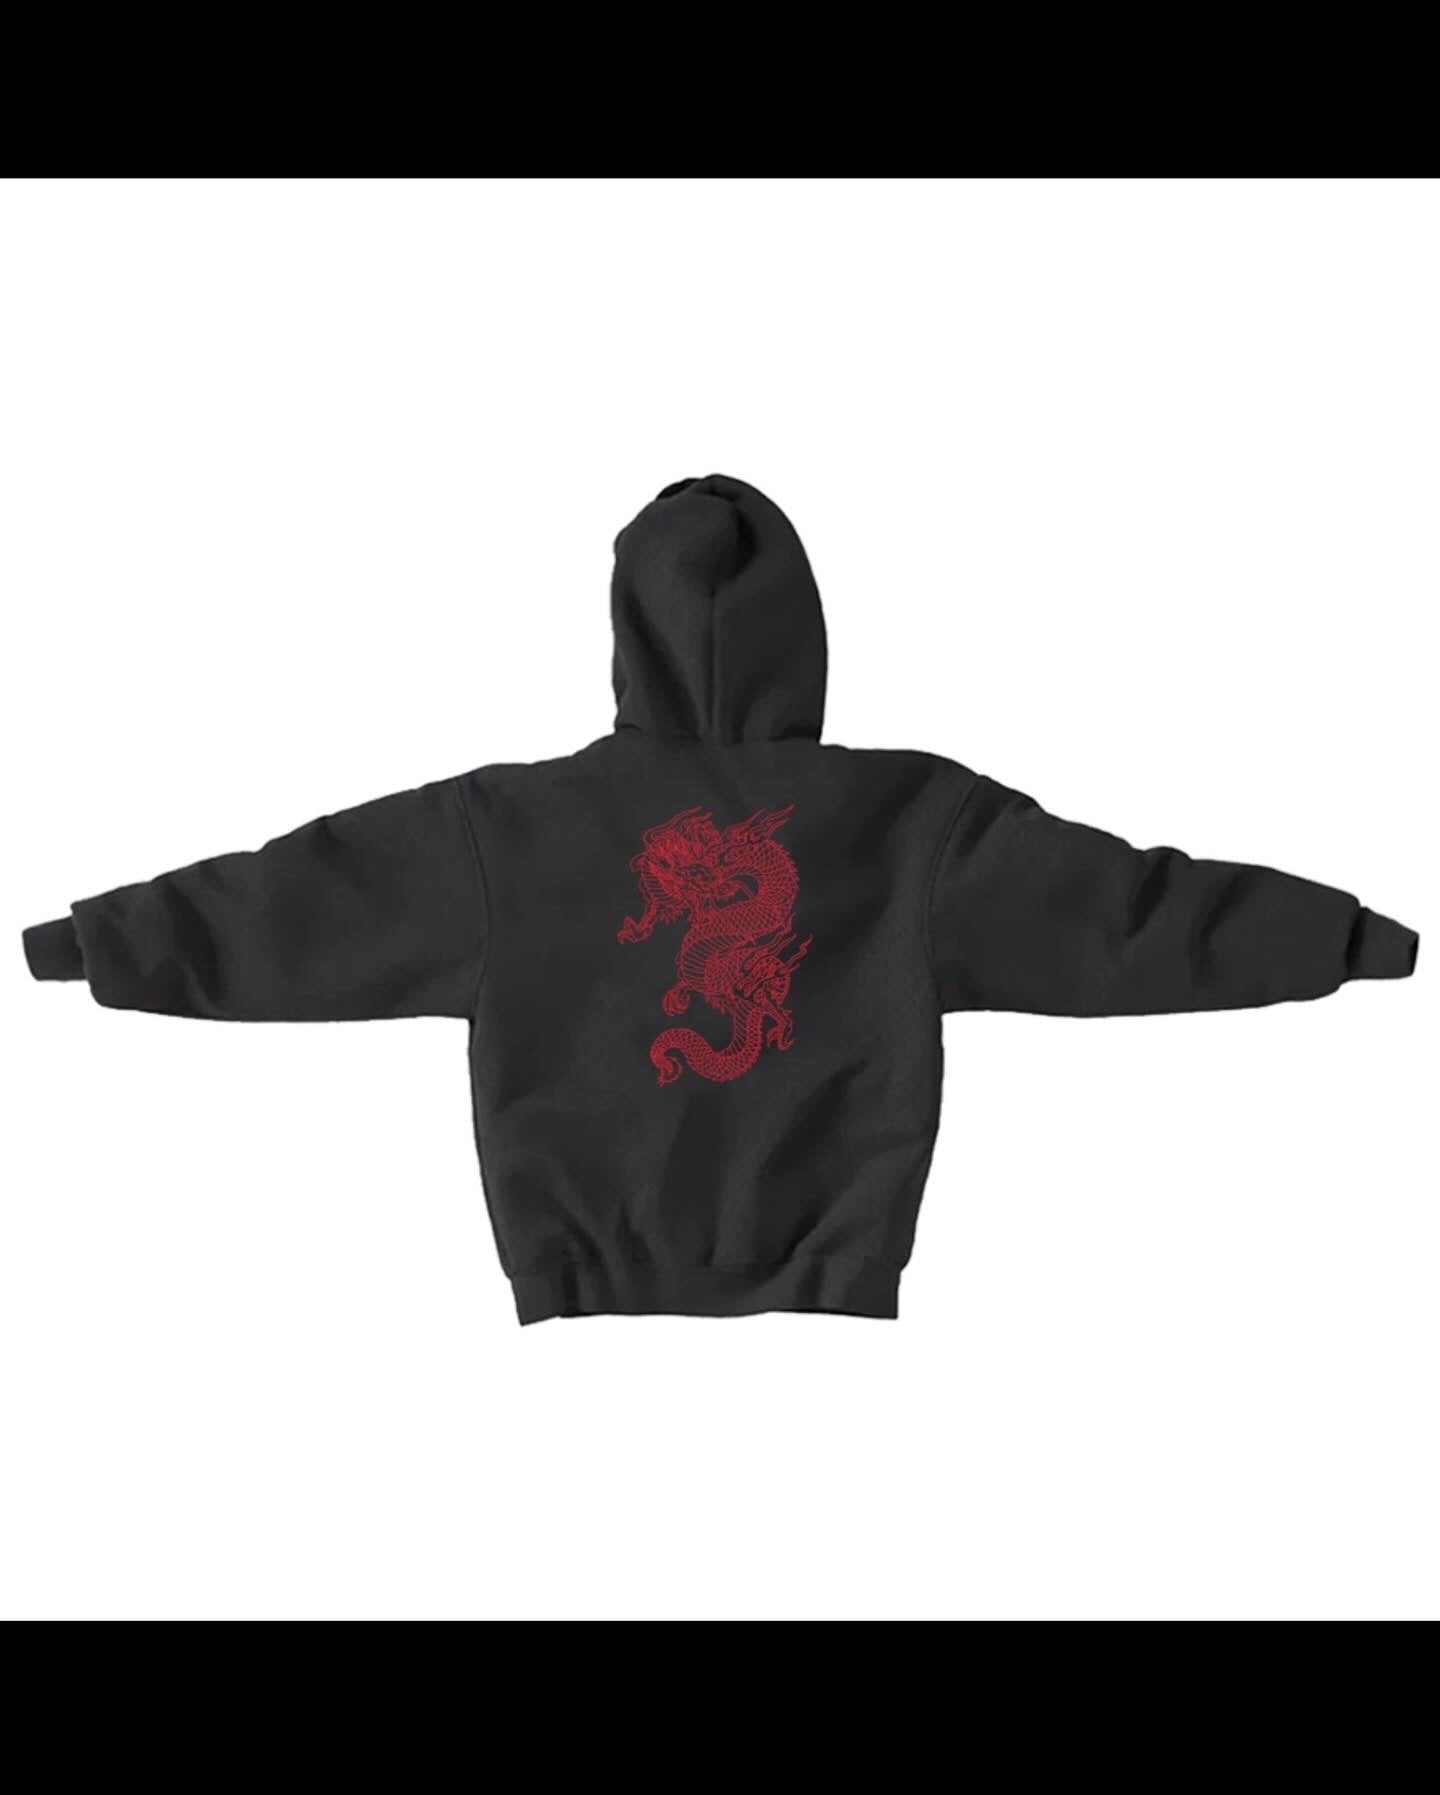 Created by the Dragon Oversized Hoodie